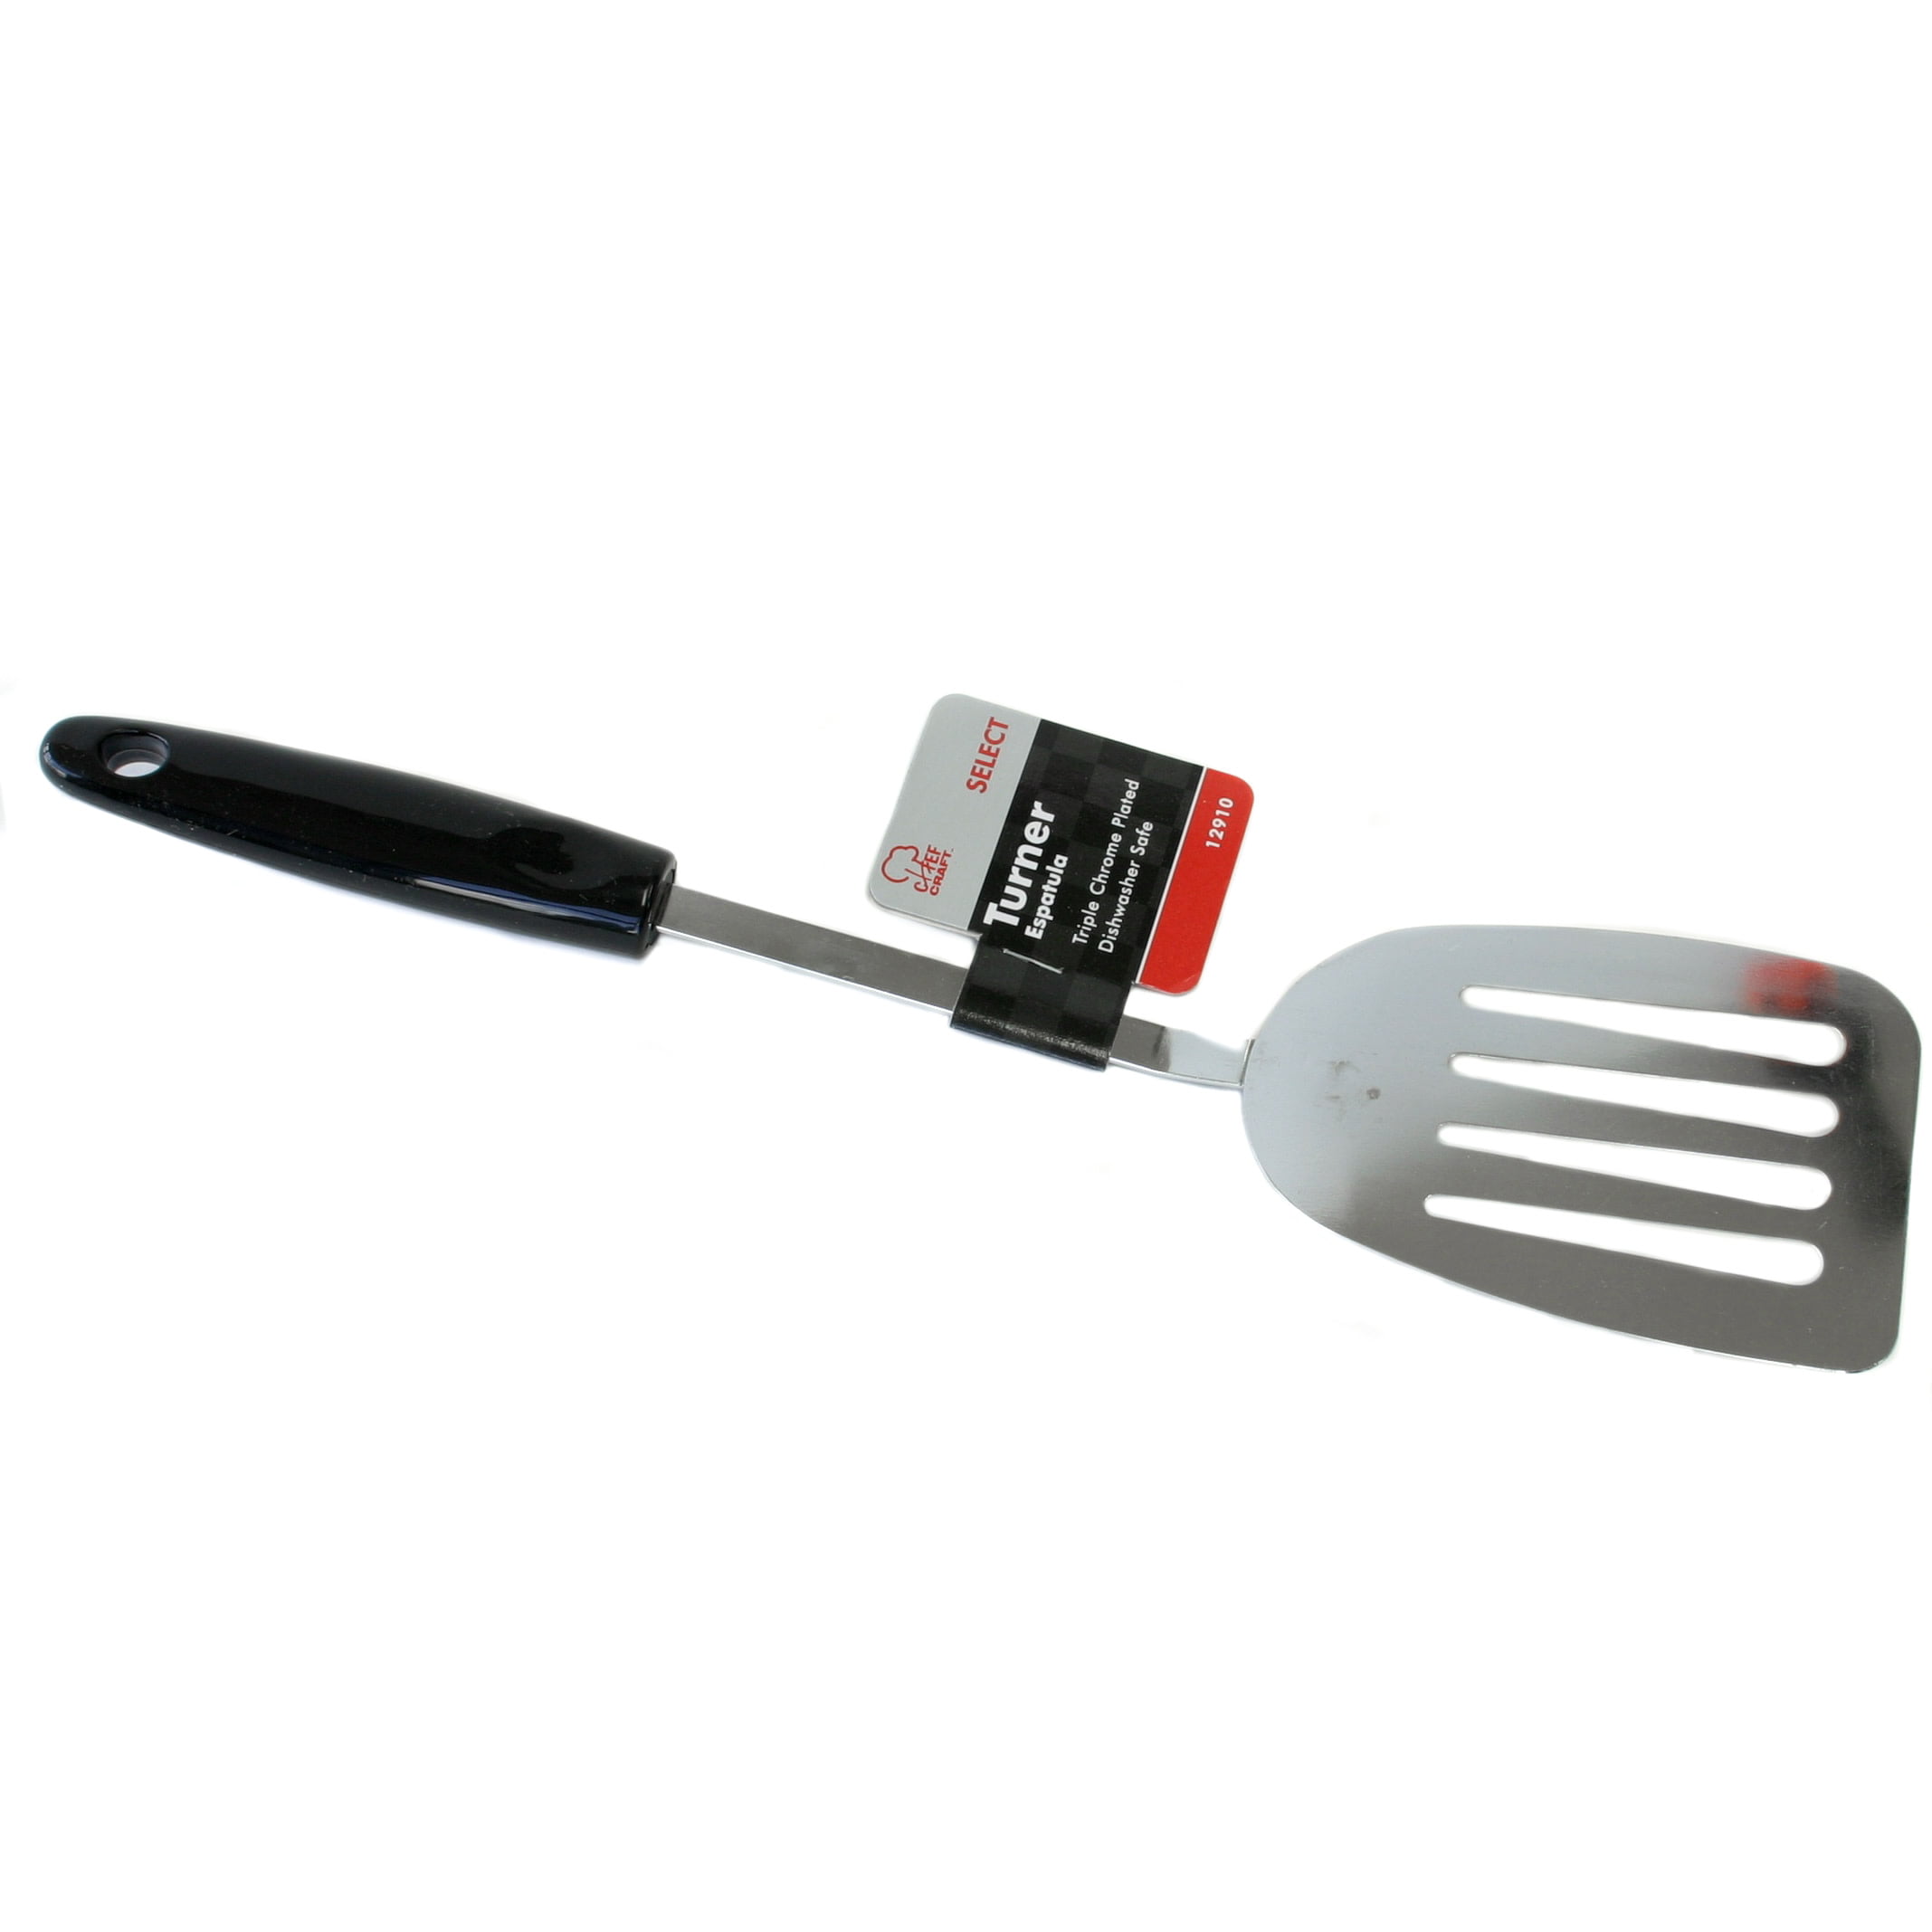 Chef Craft Select Turner/Spatula, 10.5 inch, Stainless Steel, Silver